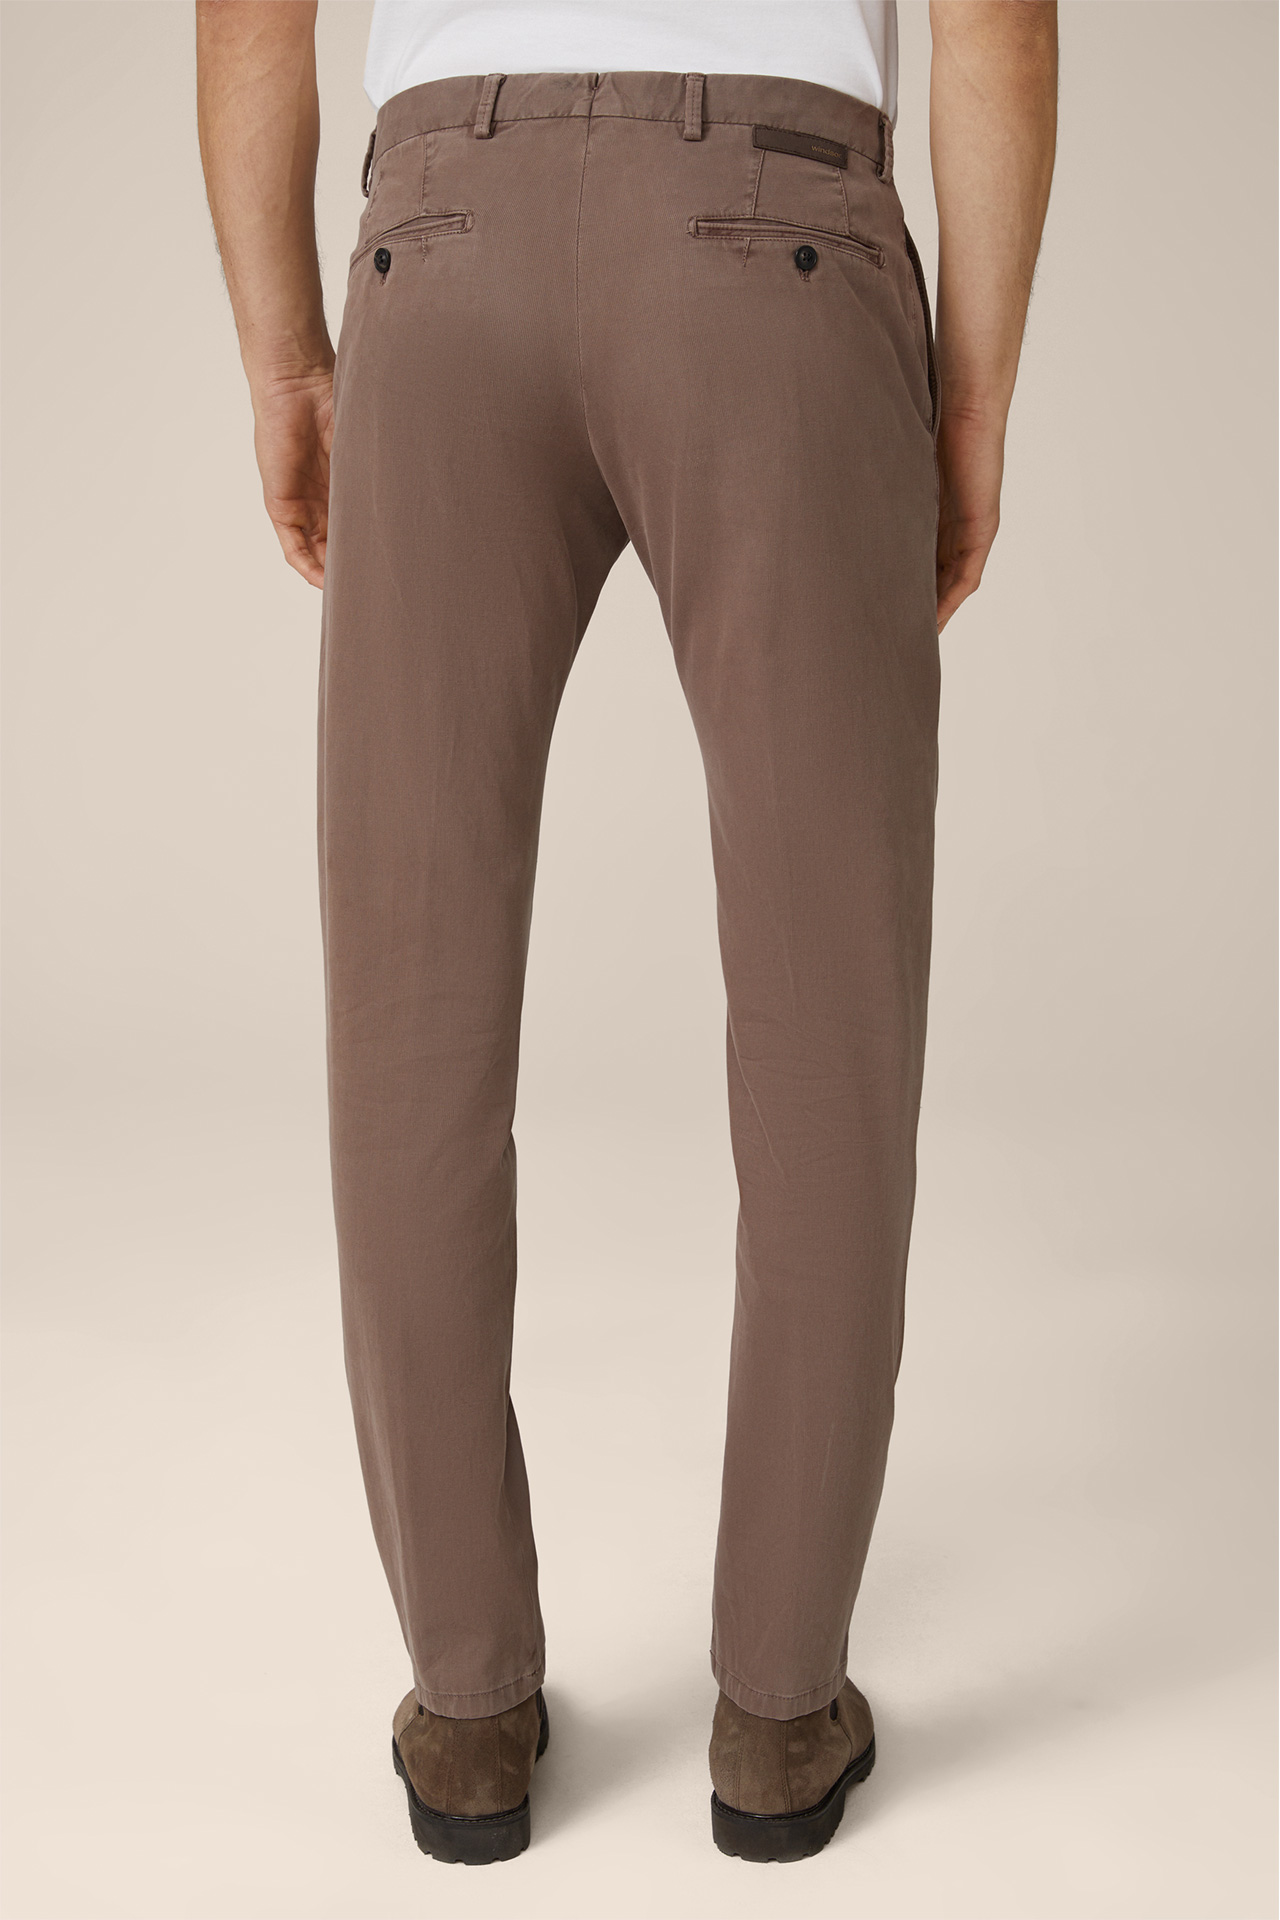 Cino Cotton Chino in Brown